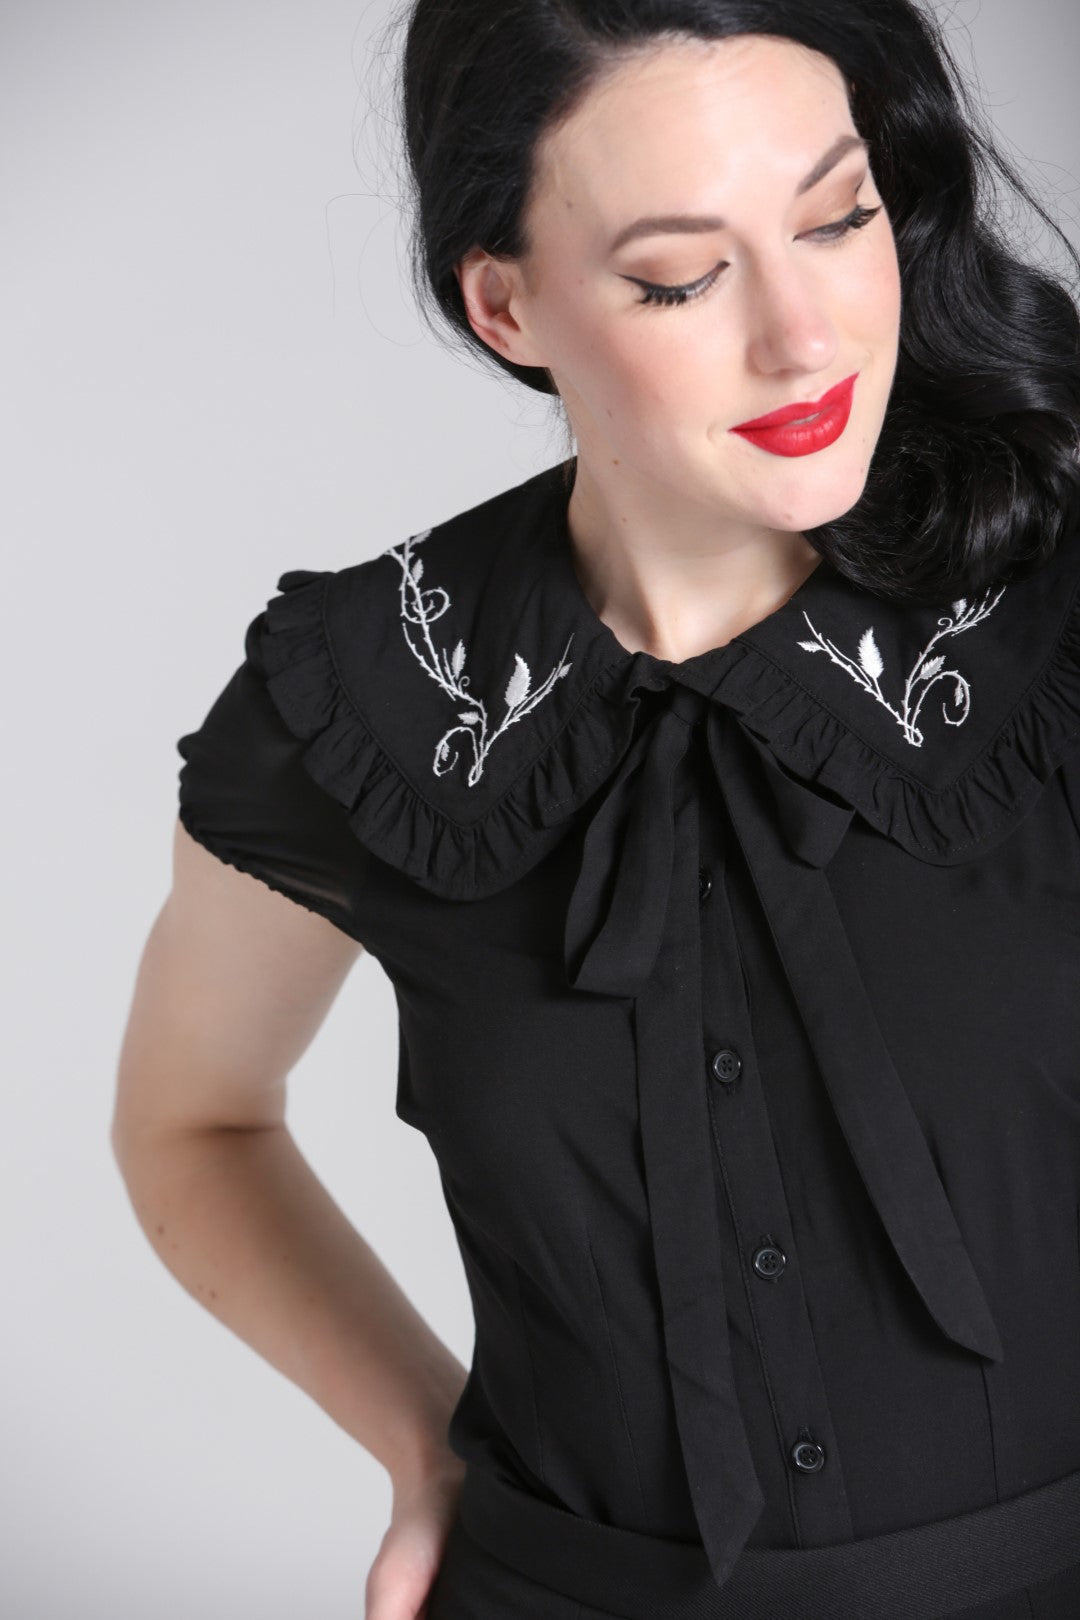 Ivie Black Blouse with Embroidered Collar by Hell Bunny